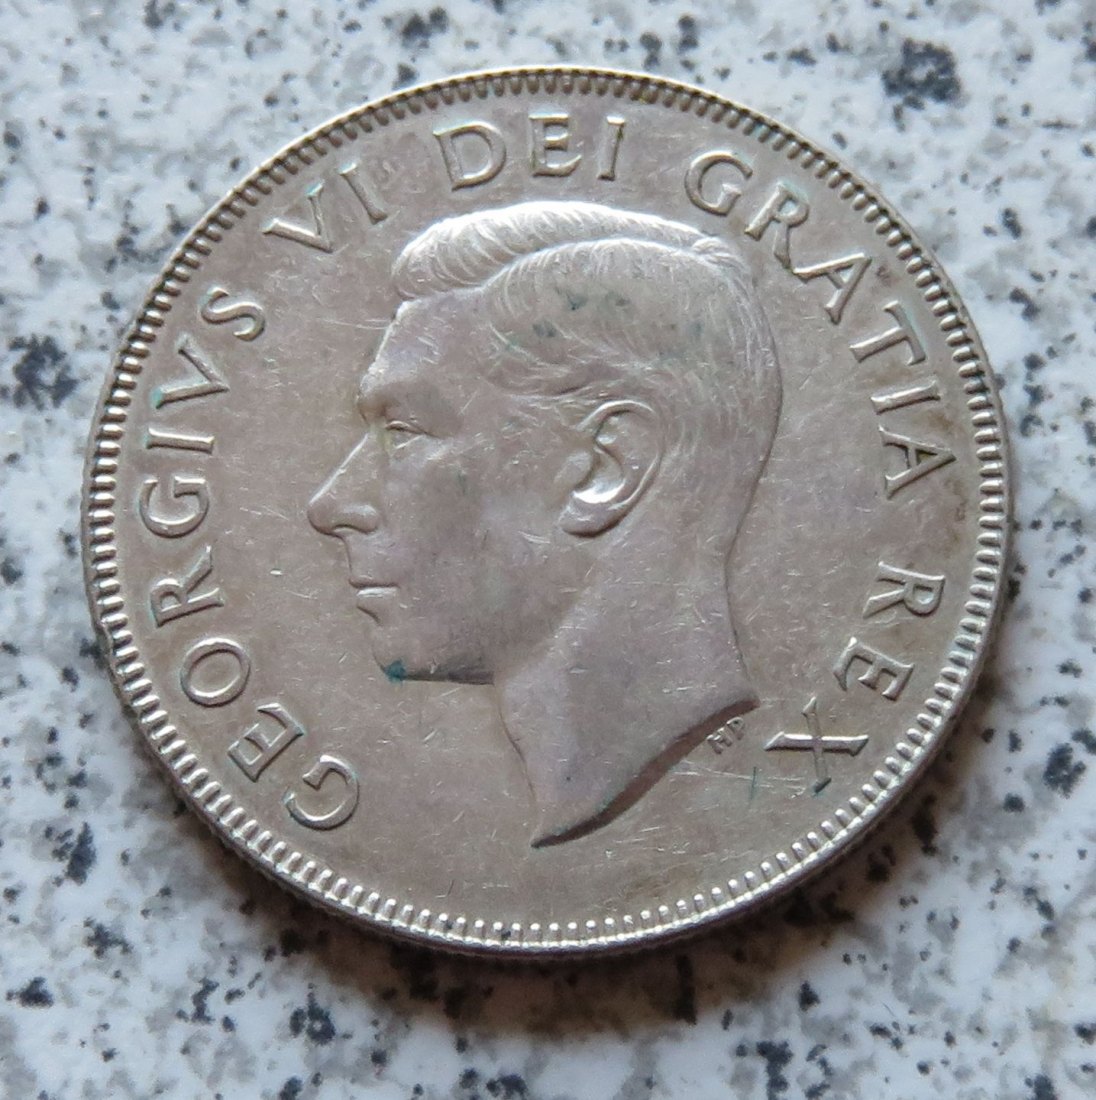  Canada 50 Cents 1949   